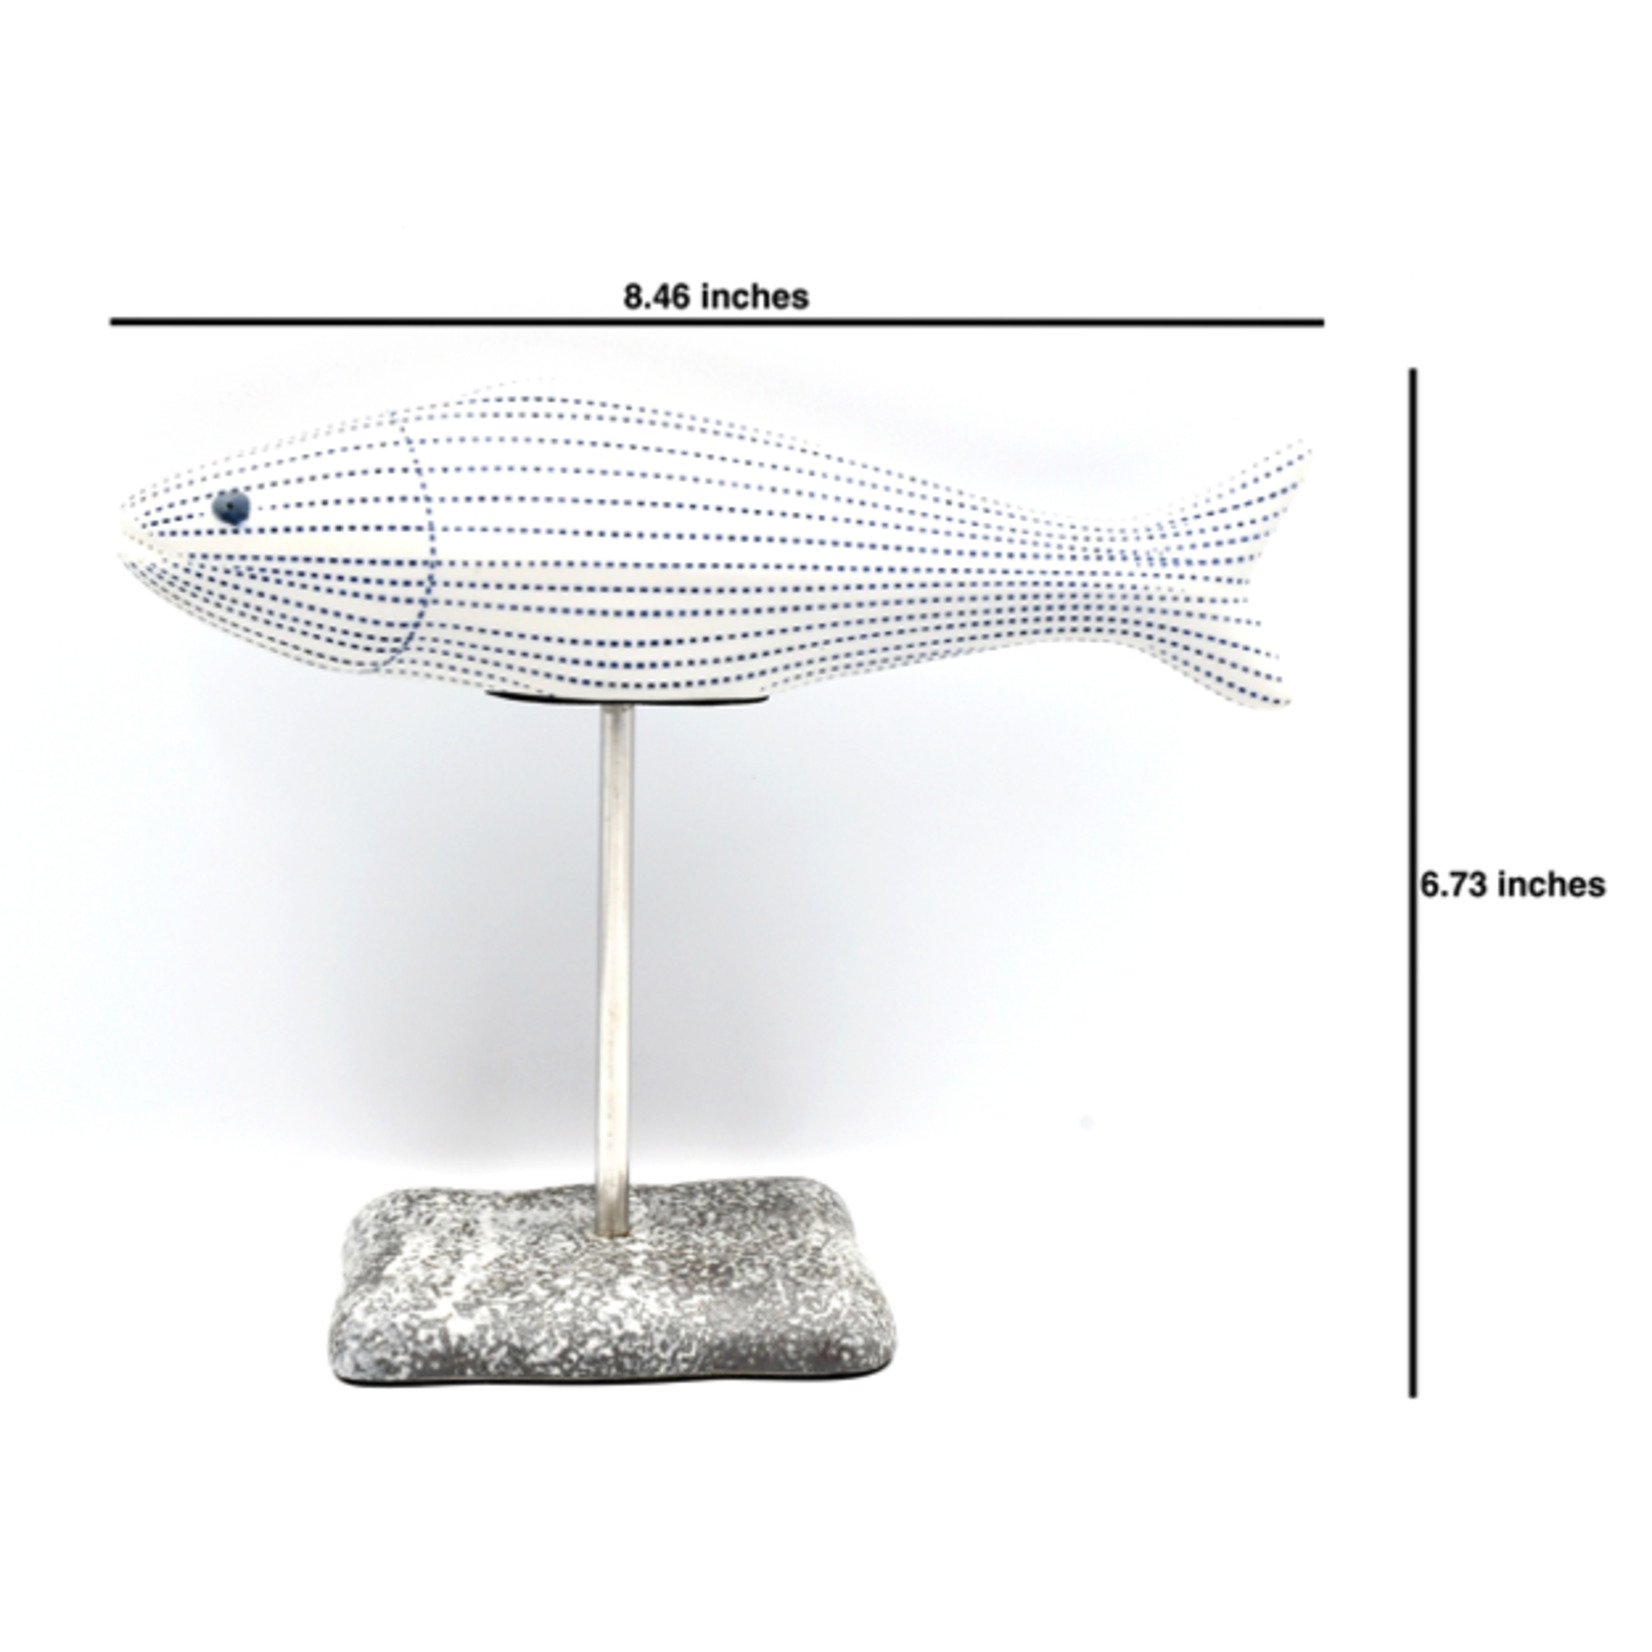 Outside The Box 7" Adrians Fish White & Blue DotsHandcrafted Porcelain Ceramic Sculpture